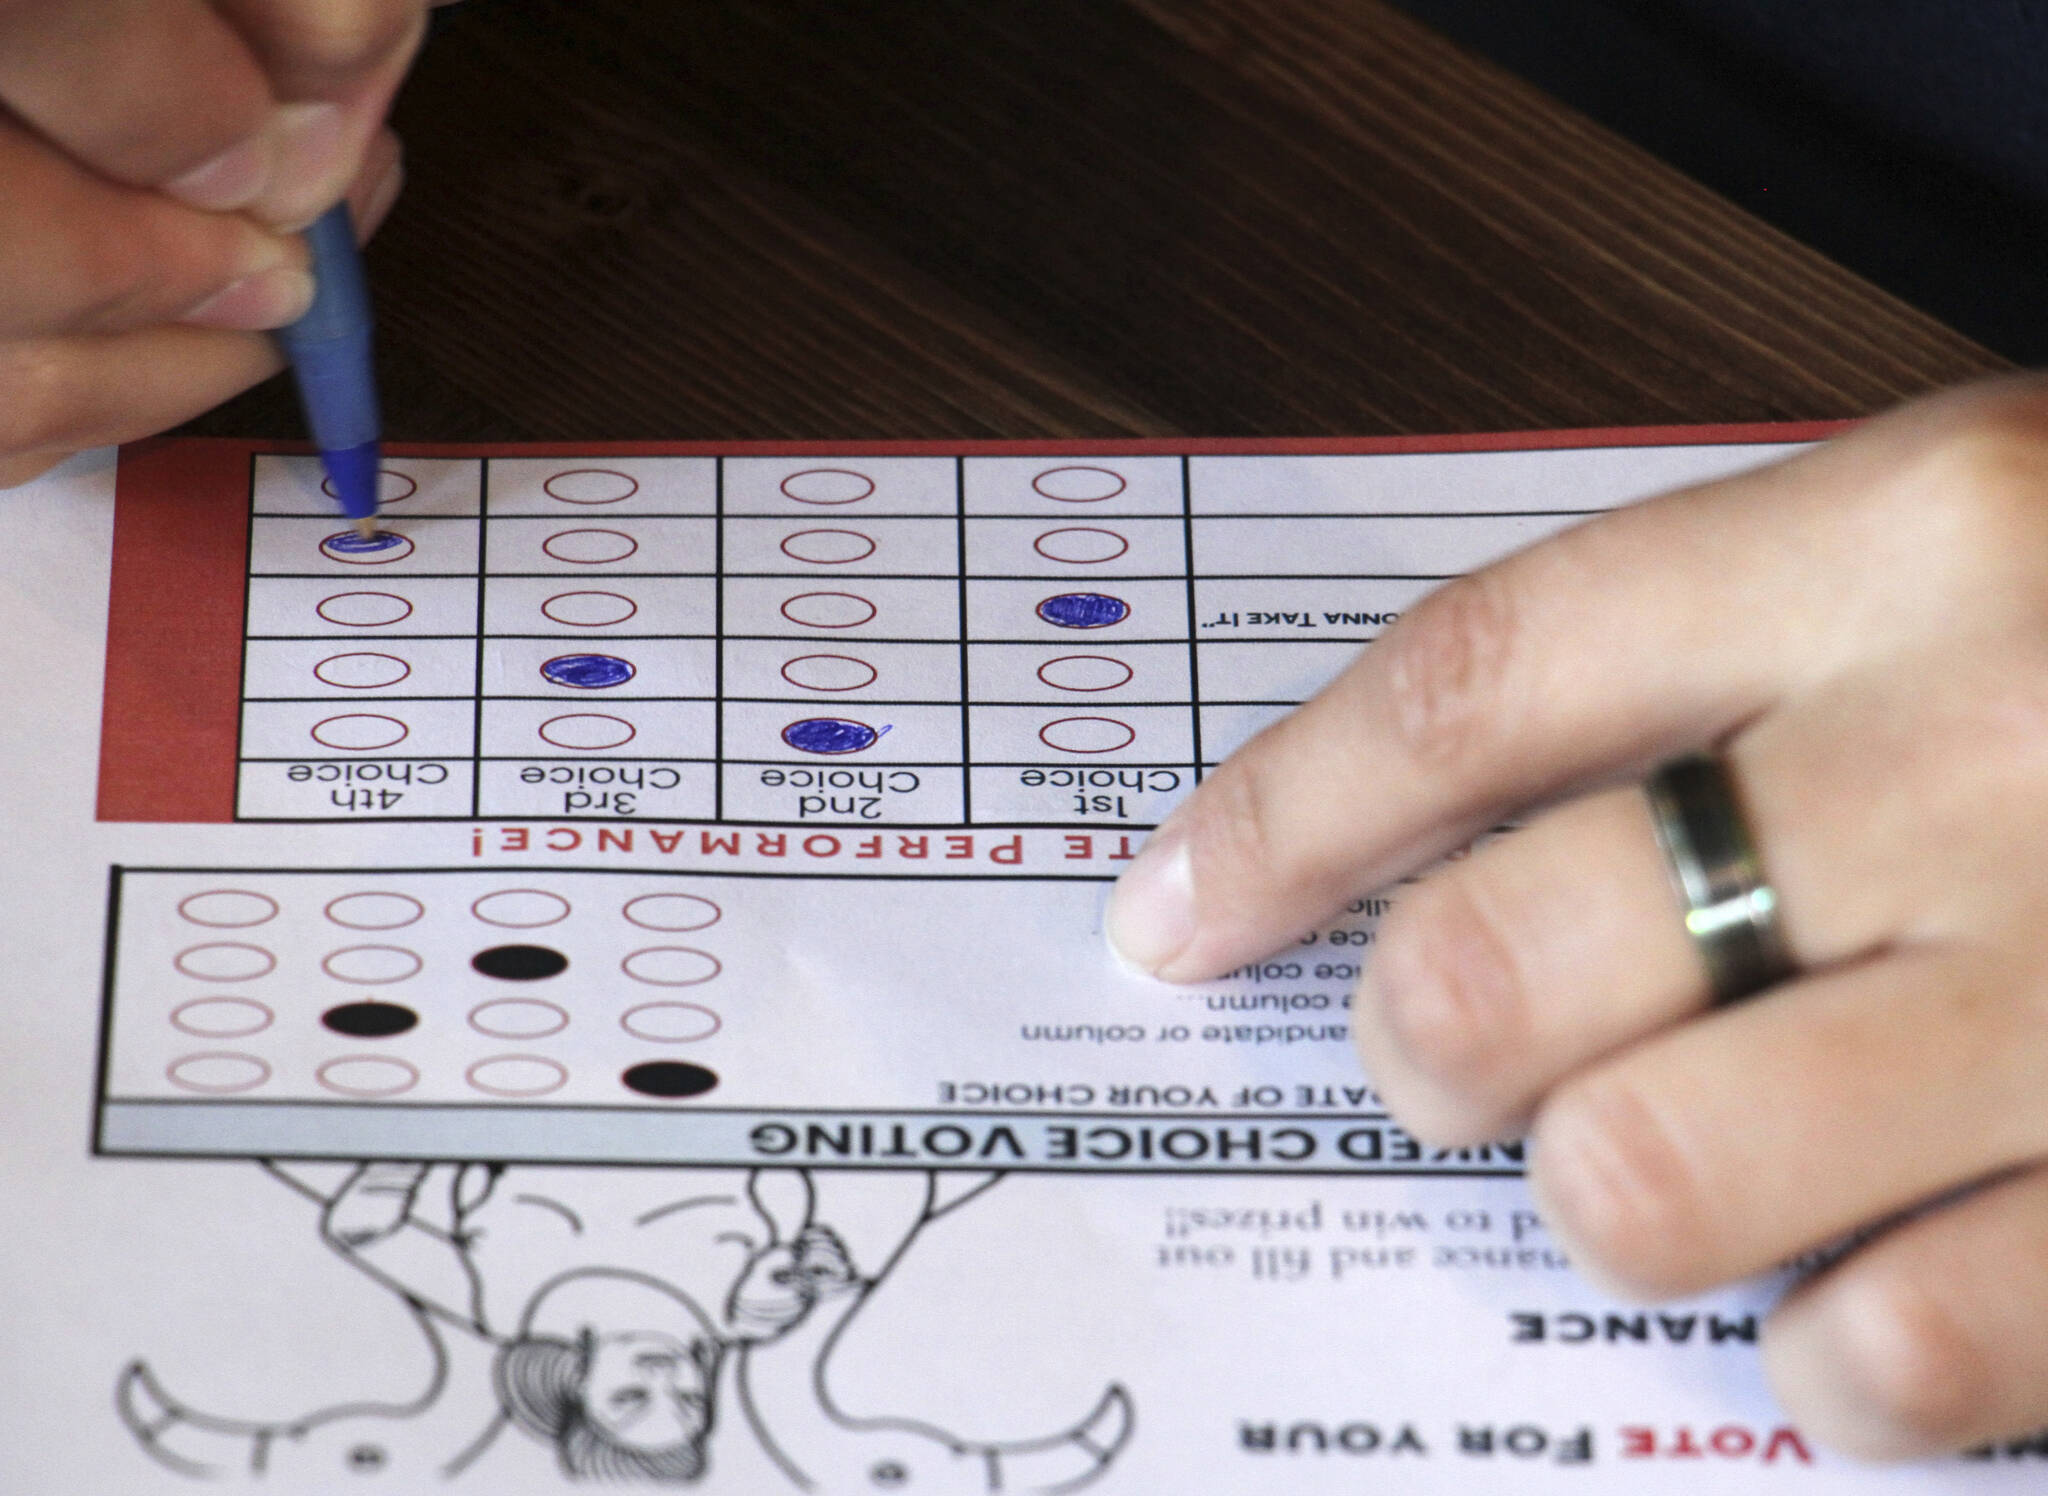 This July 28, 2022, photo shows a person completing a ballot in a mock election at Cafecito Bonito in Anchorage, where people ranked the performances by drag performers, one of the education efforts about ranked choice voting in elections that year. (Mark Thiessen/AP file photo)